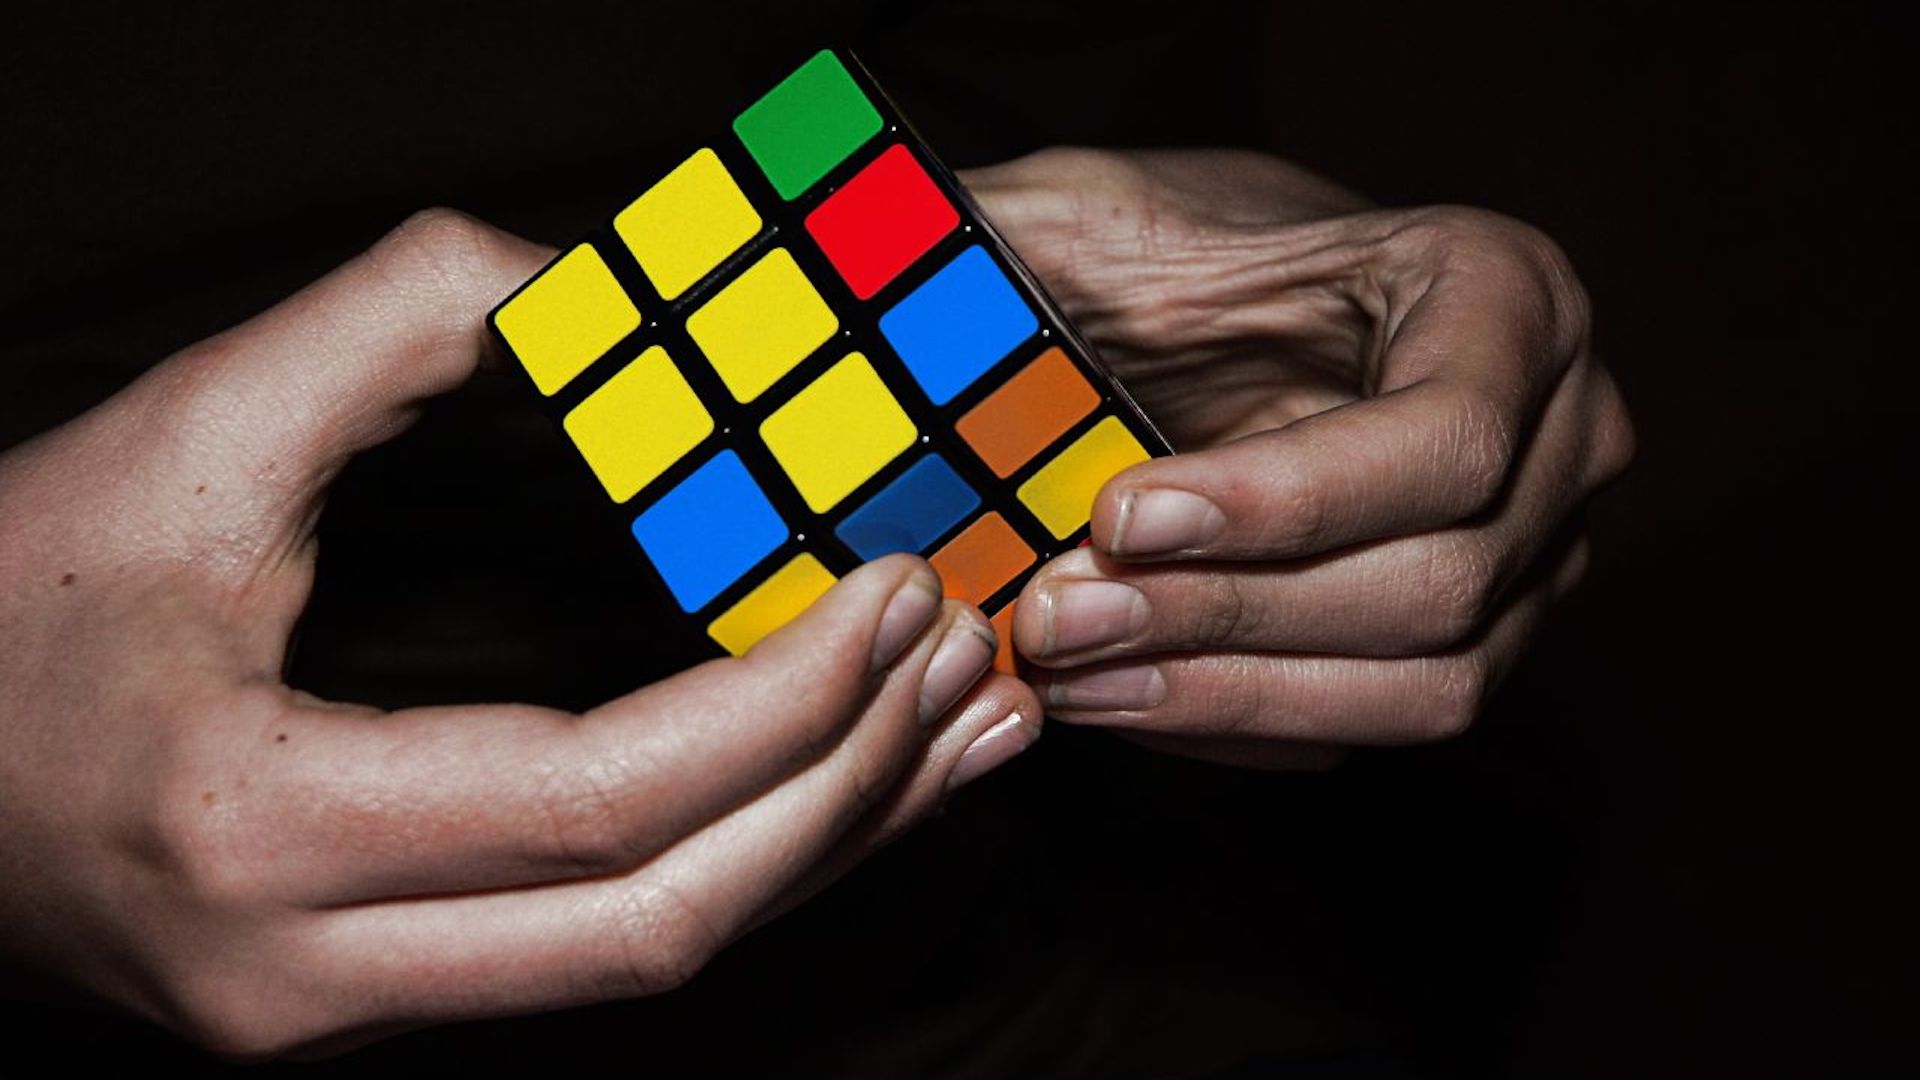 Two hands hold a Rubik's Cube